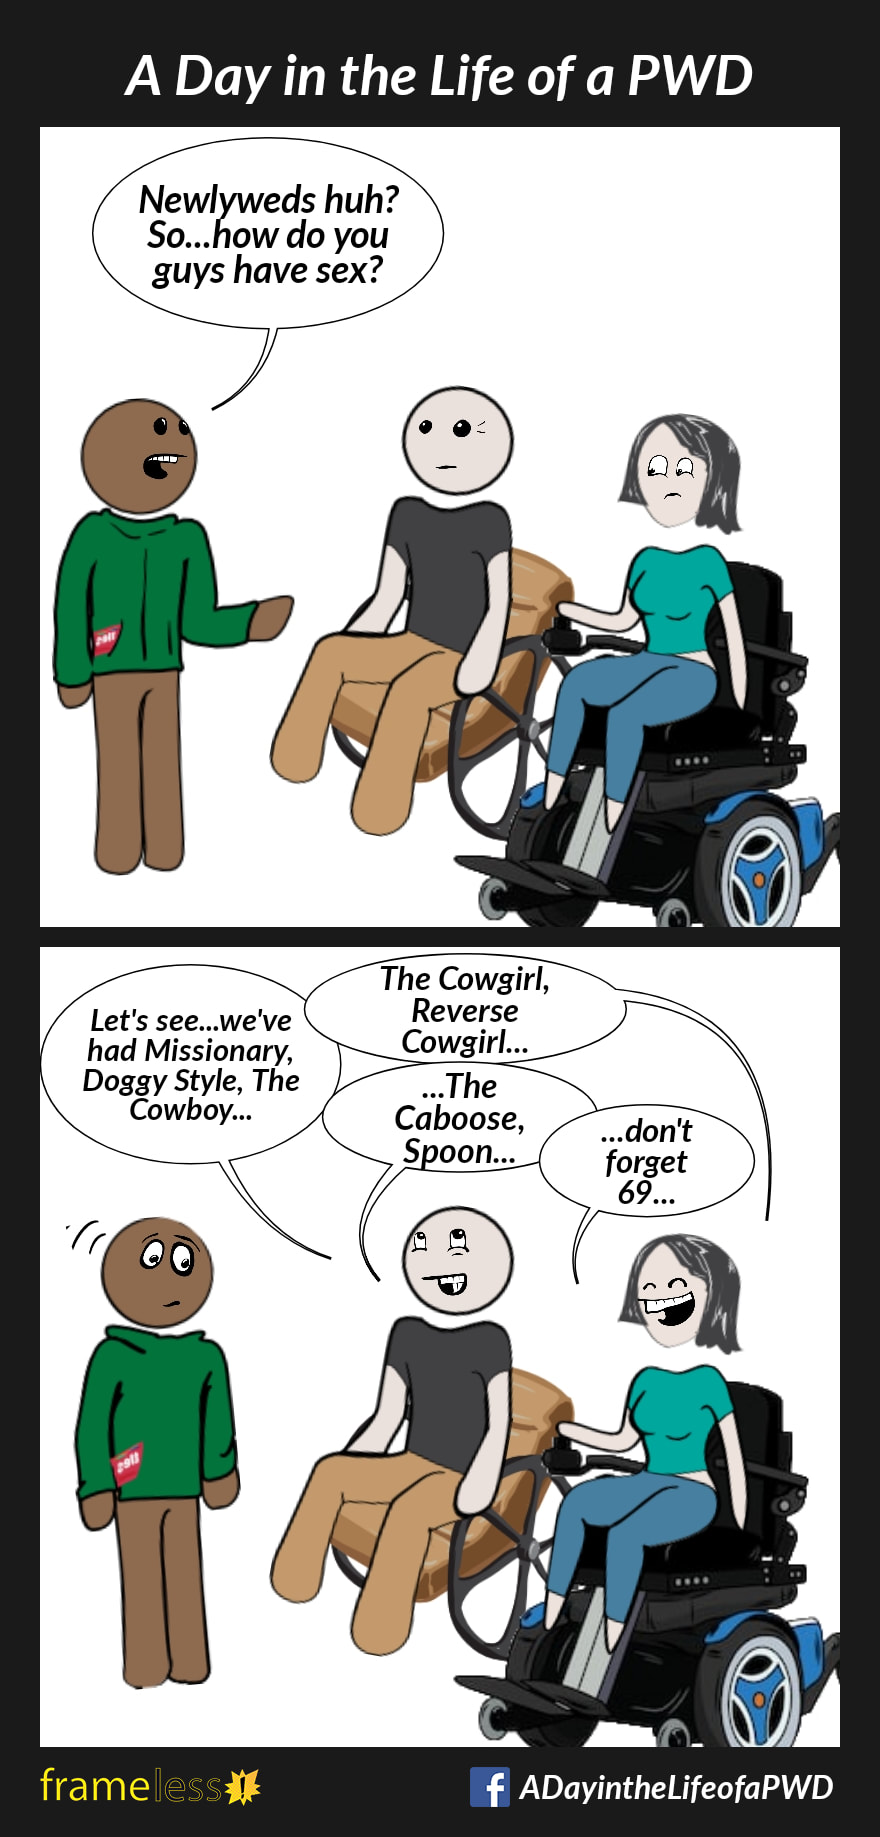 COMIC STRIP 
A Day in the Life of a PWD (Person With a Disability) 

Frame 1:
A husband, who uses a manual wheelchair, and his wife, who uses a power wheelchair, is talking to a man.
MAN: Newlyweds huh? So...how do you guys have sex?

Frame 2:
HUSBAND: Let's see...we've had Missionary, Doggy Style, The Cowboy...
WIFE: The Cowgirl, Reverse Cowgirl...
HUSBAND: ...The Caboose, Spoon...
WIFE: ...don't forget 69...